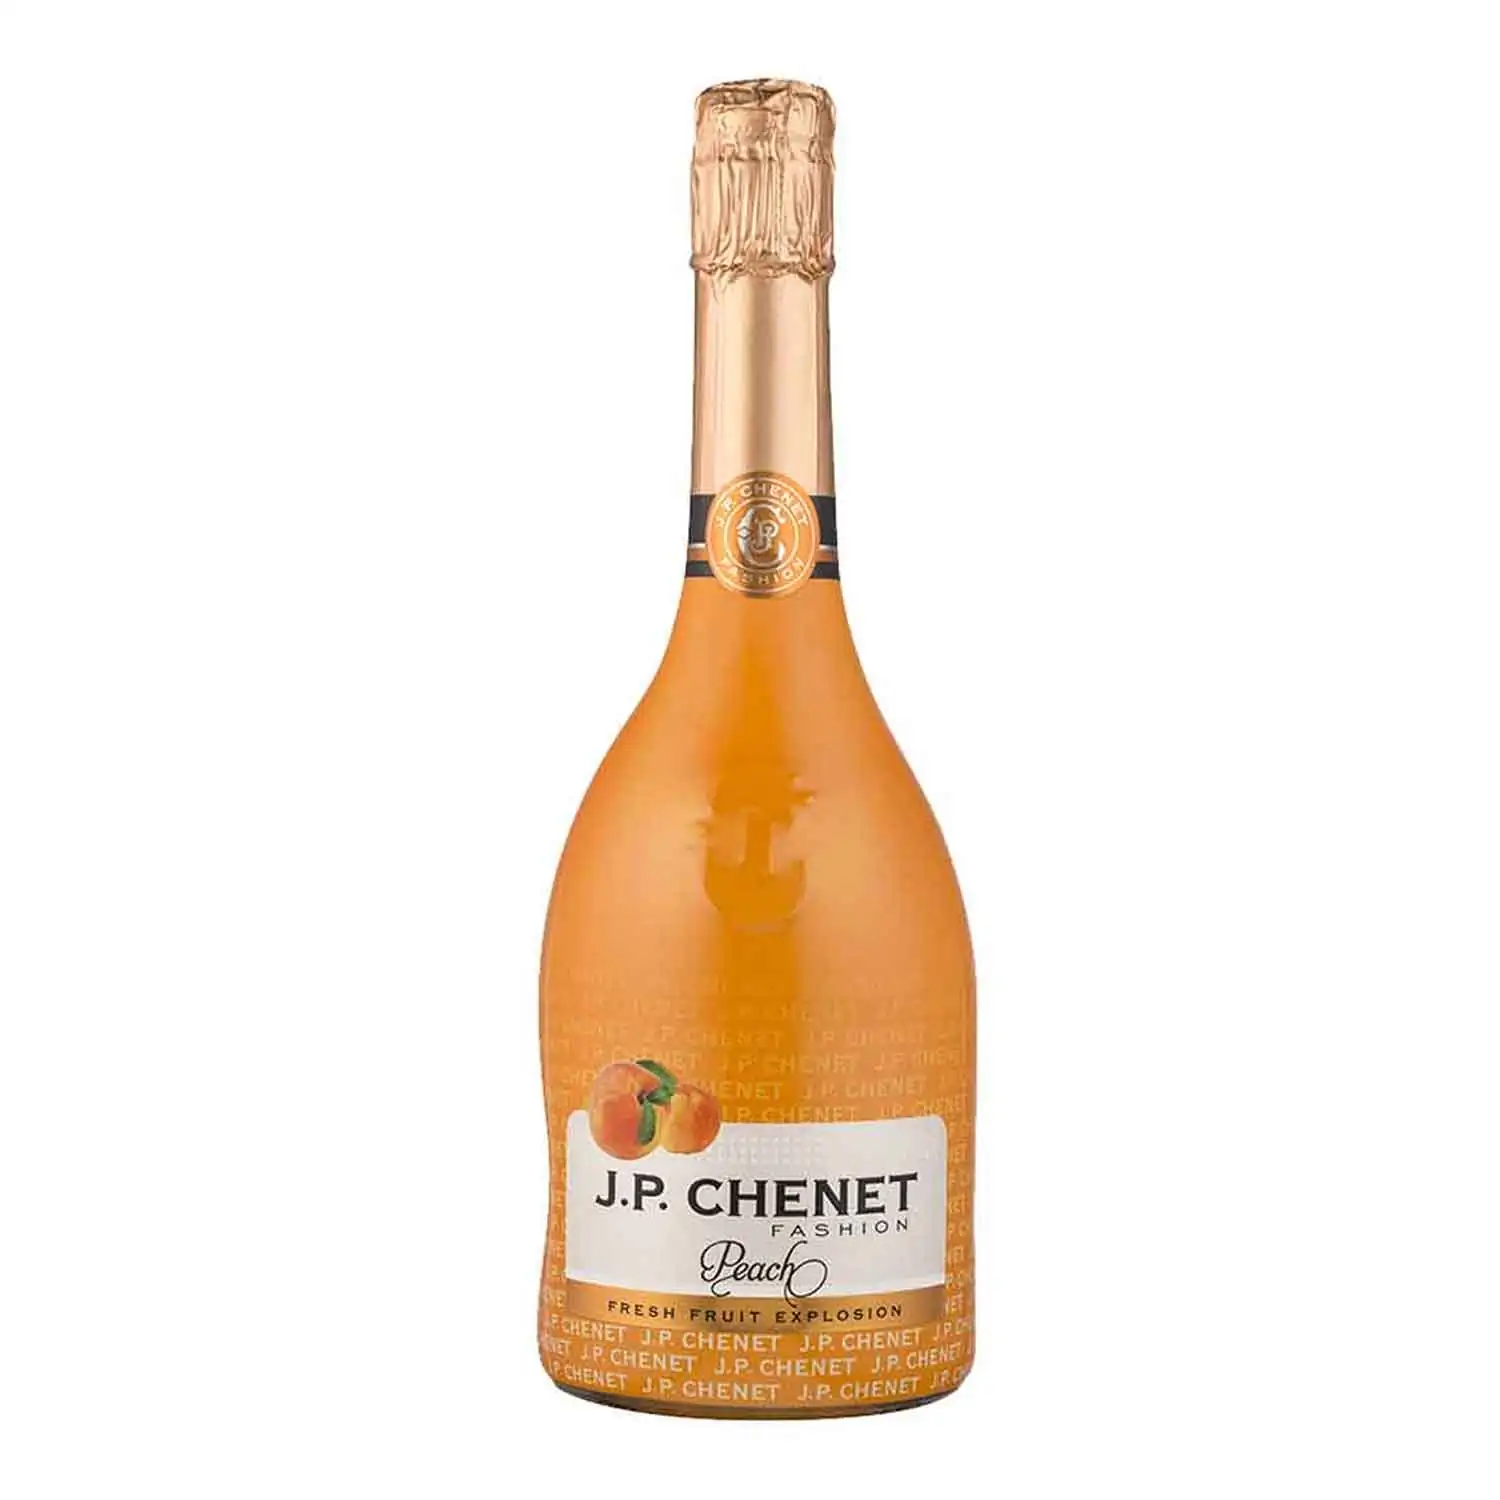 JP Chenet fashion pêche 75cl Alc 12% - Buy at Real Tobacco